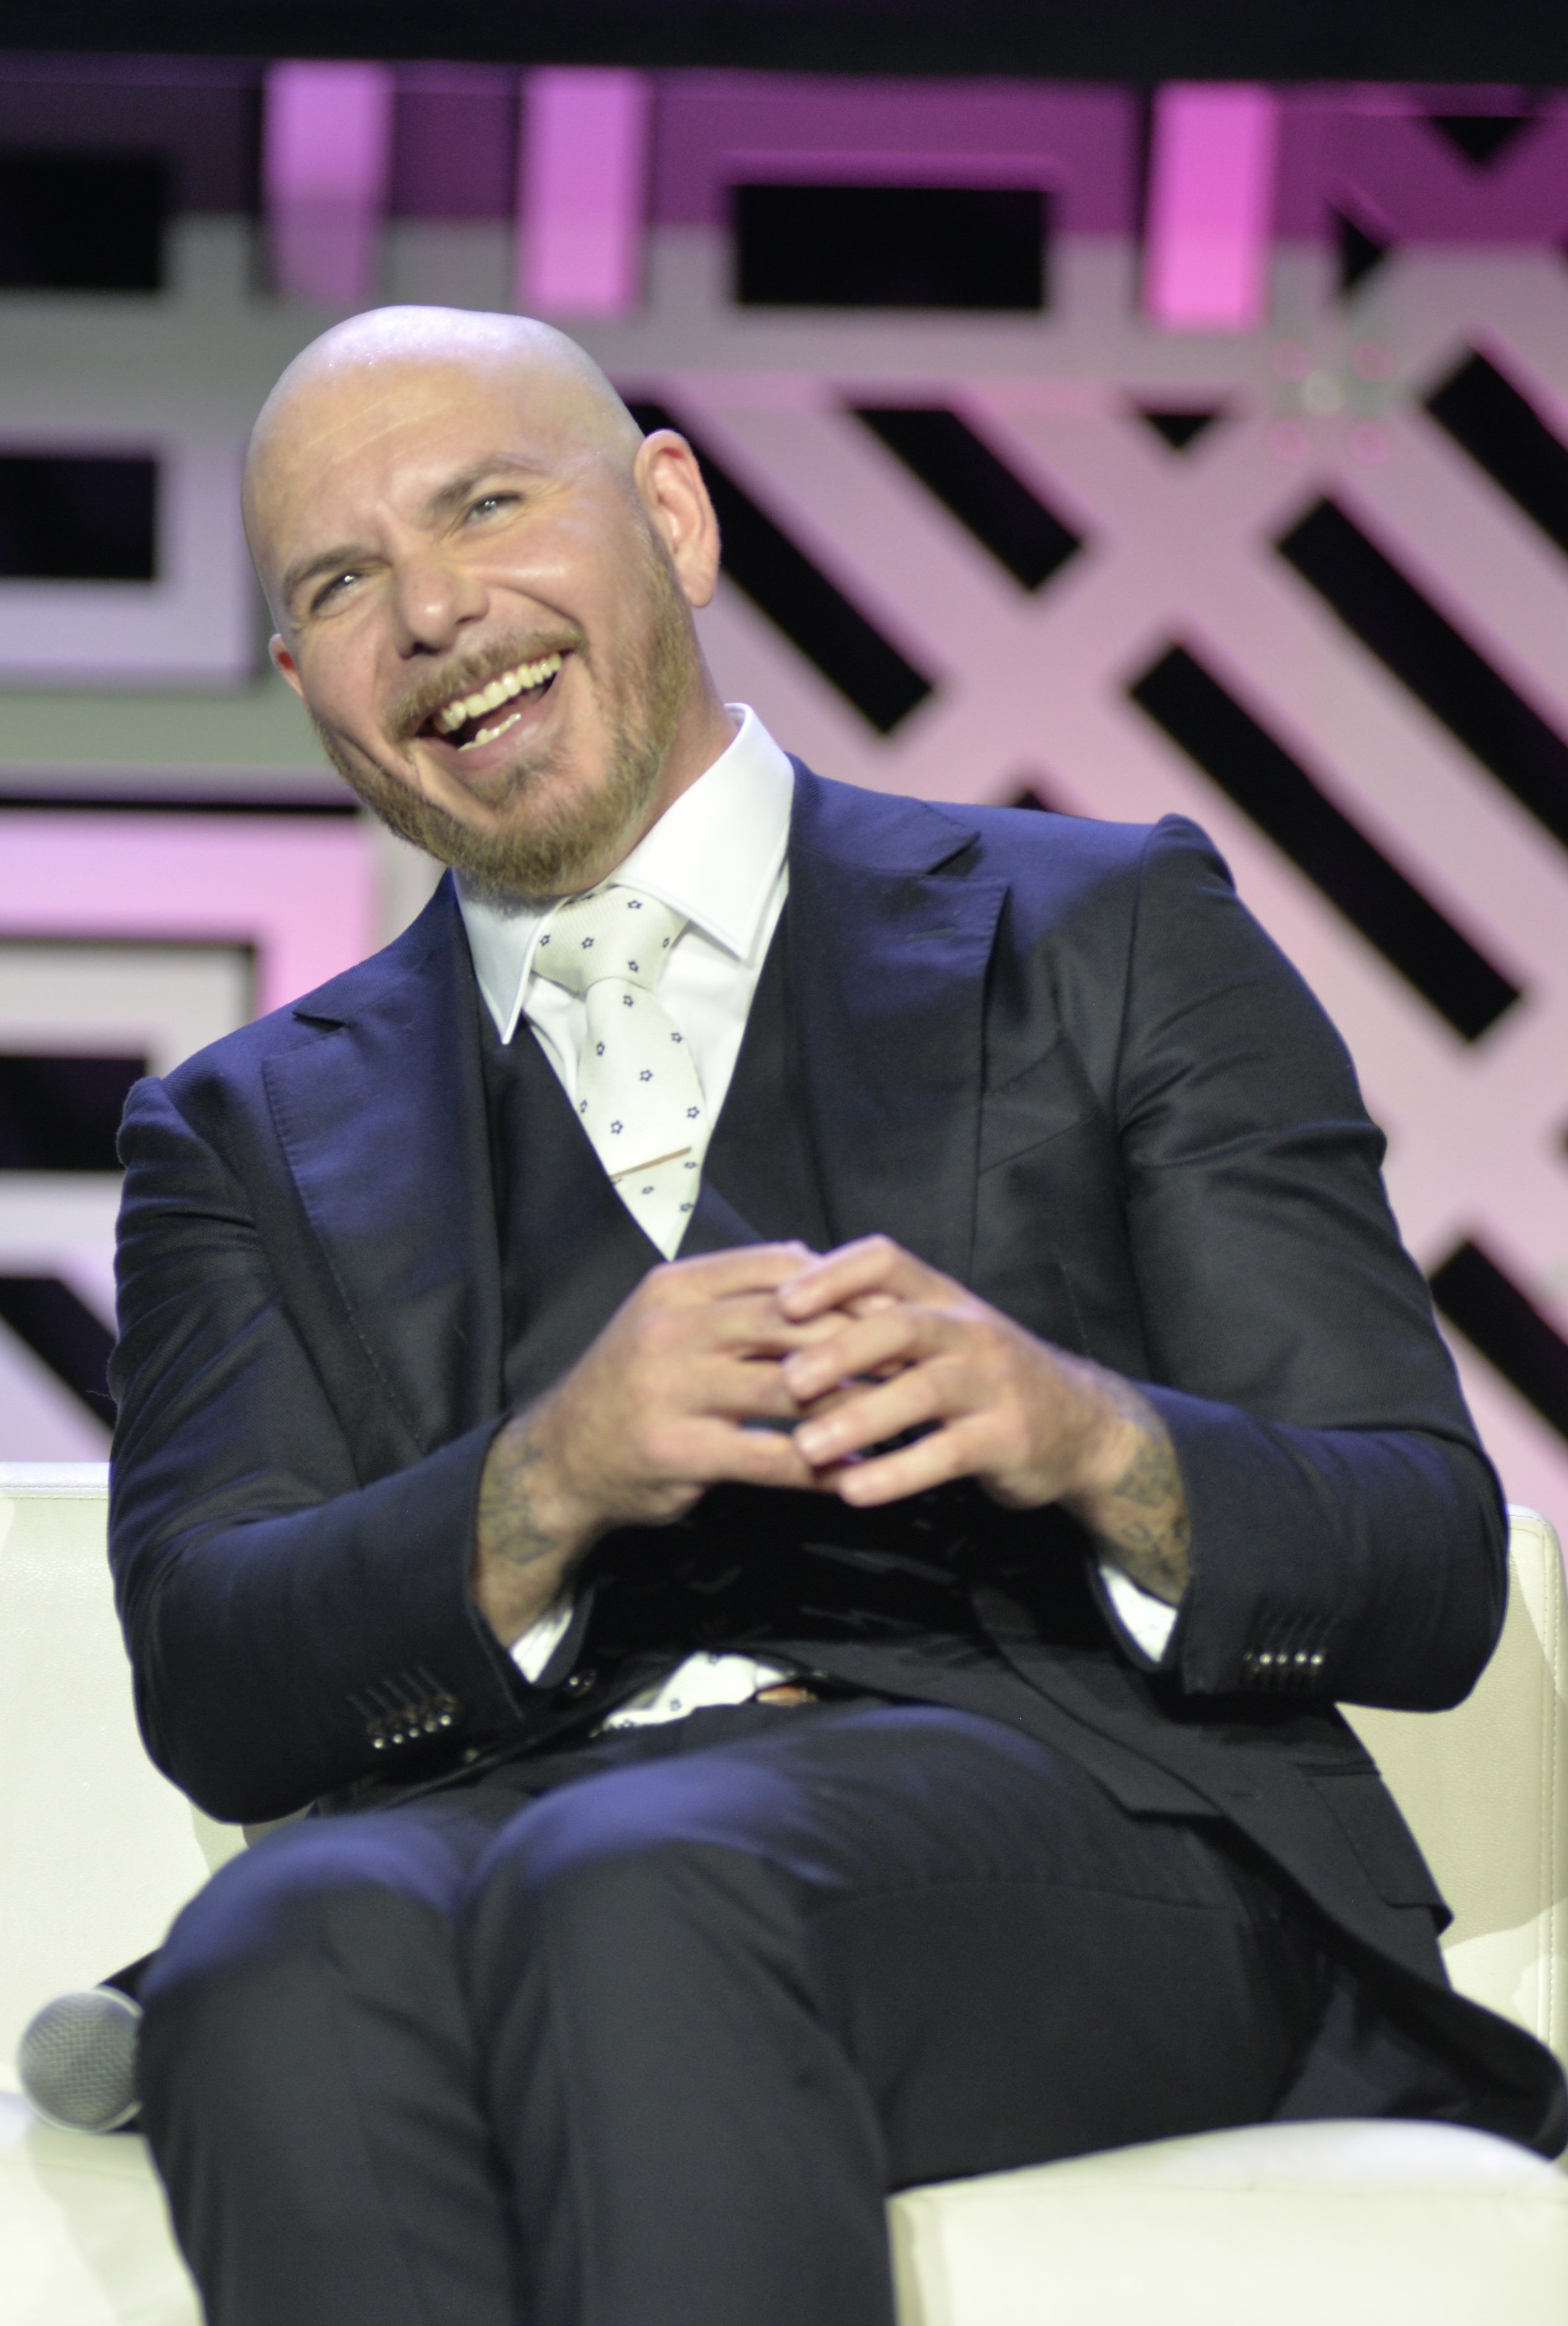 Pitbull at Emerge Americas 2022 on April 18th, 2022, in Florida | Source: Getty Images